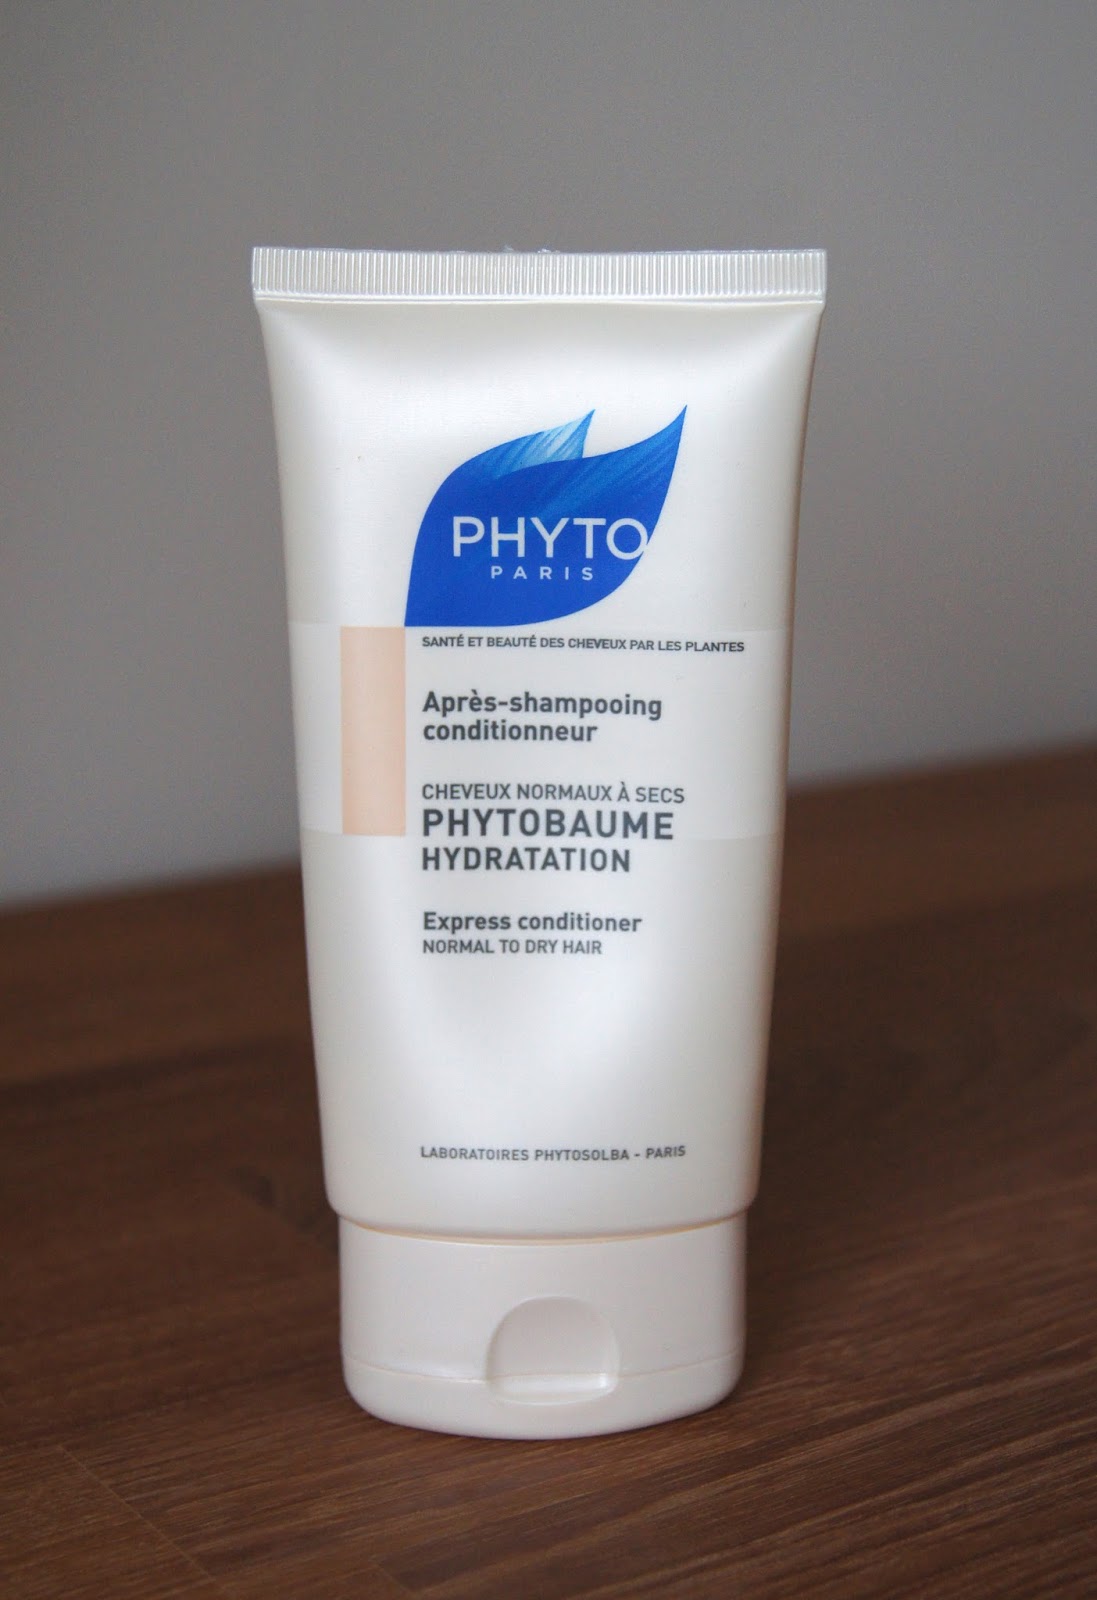 phyto phytobaume hydration express conditioner empty review